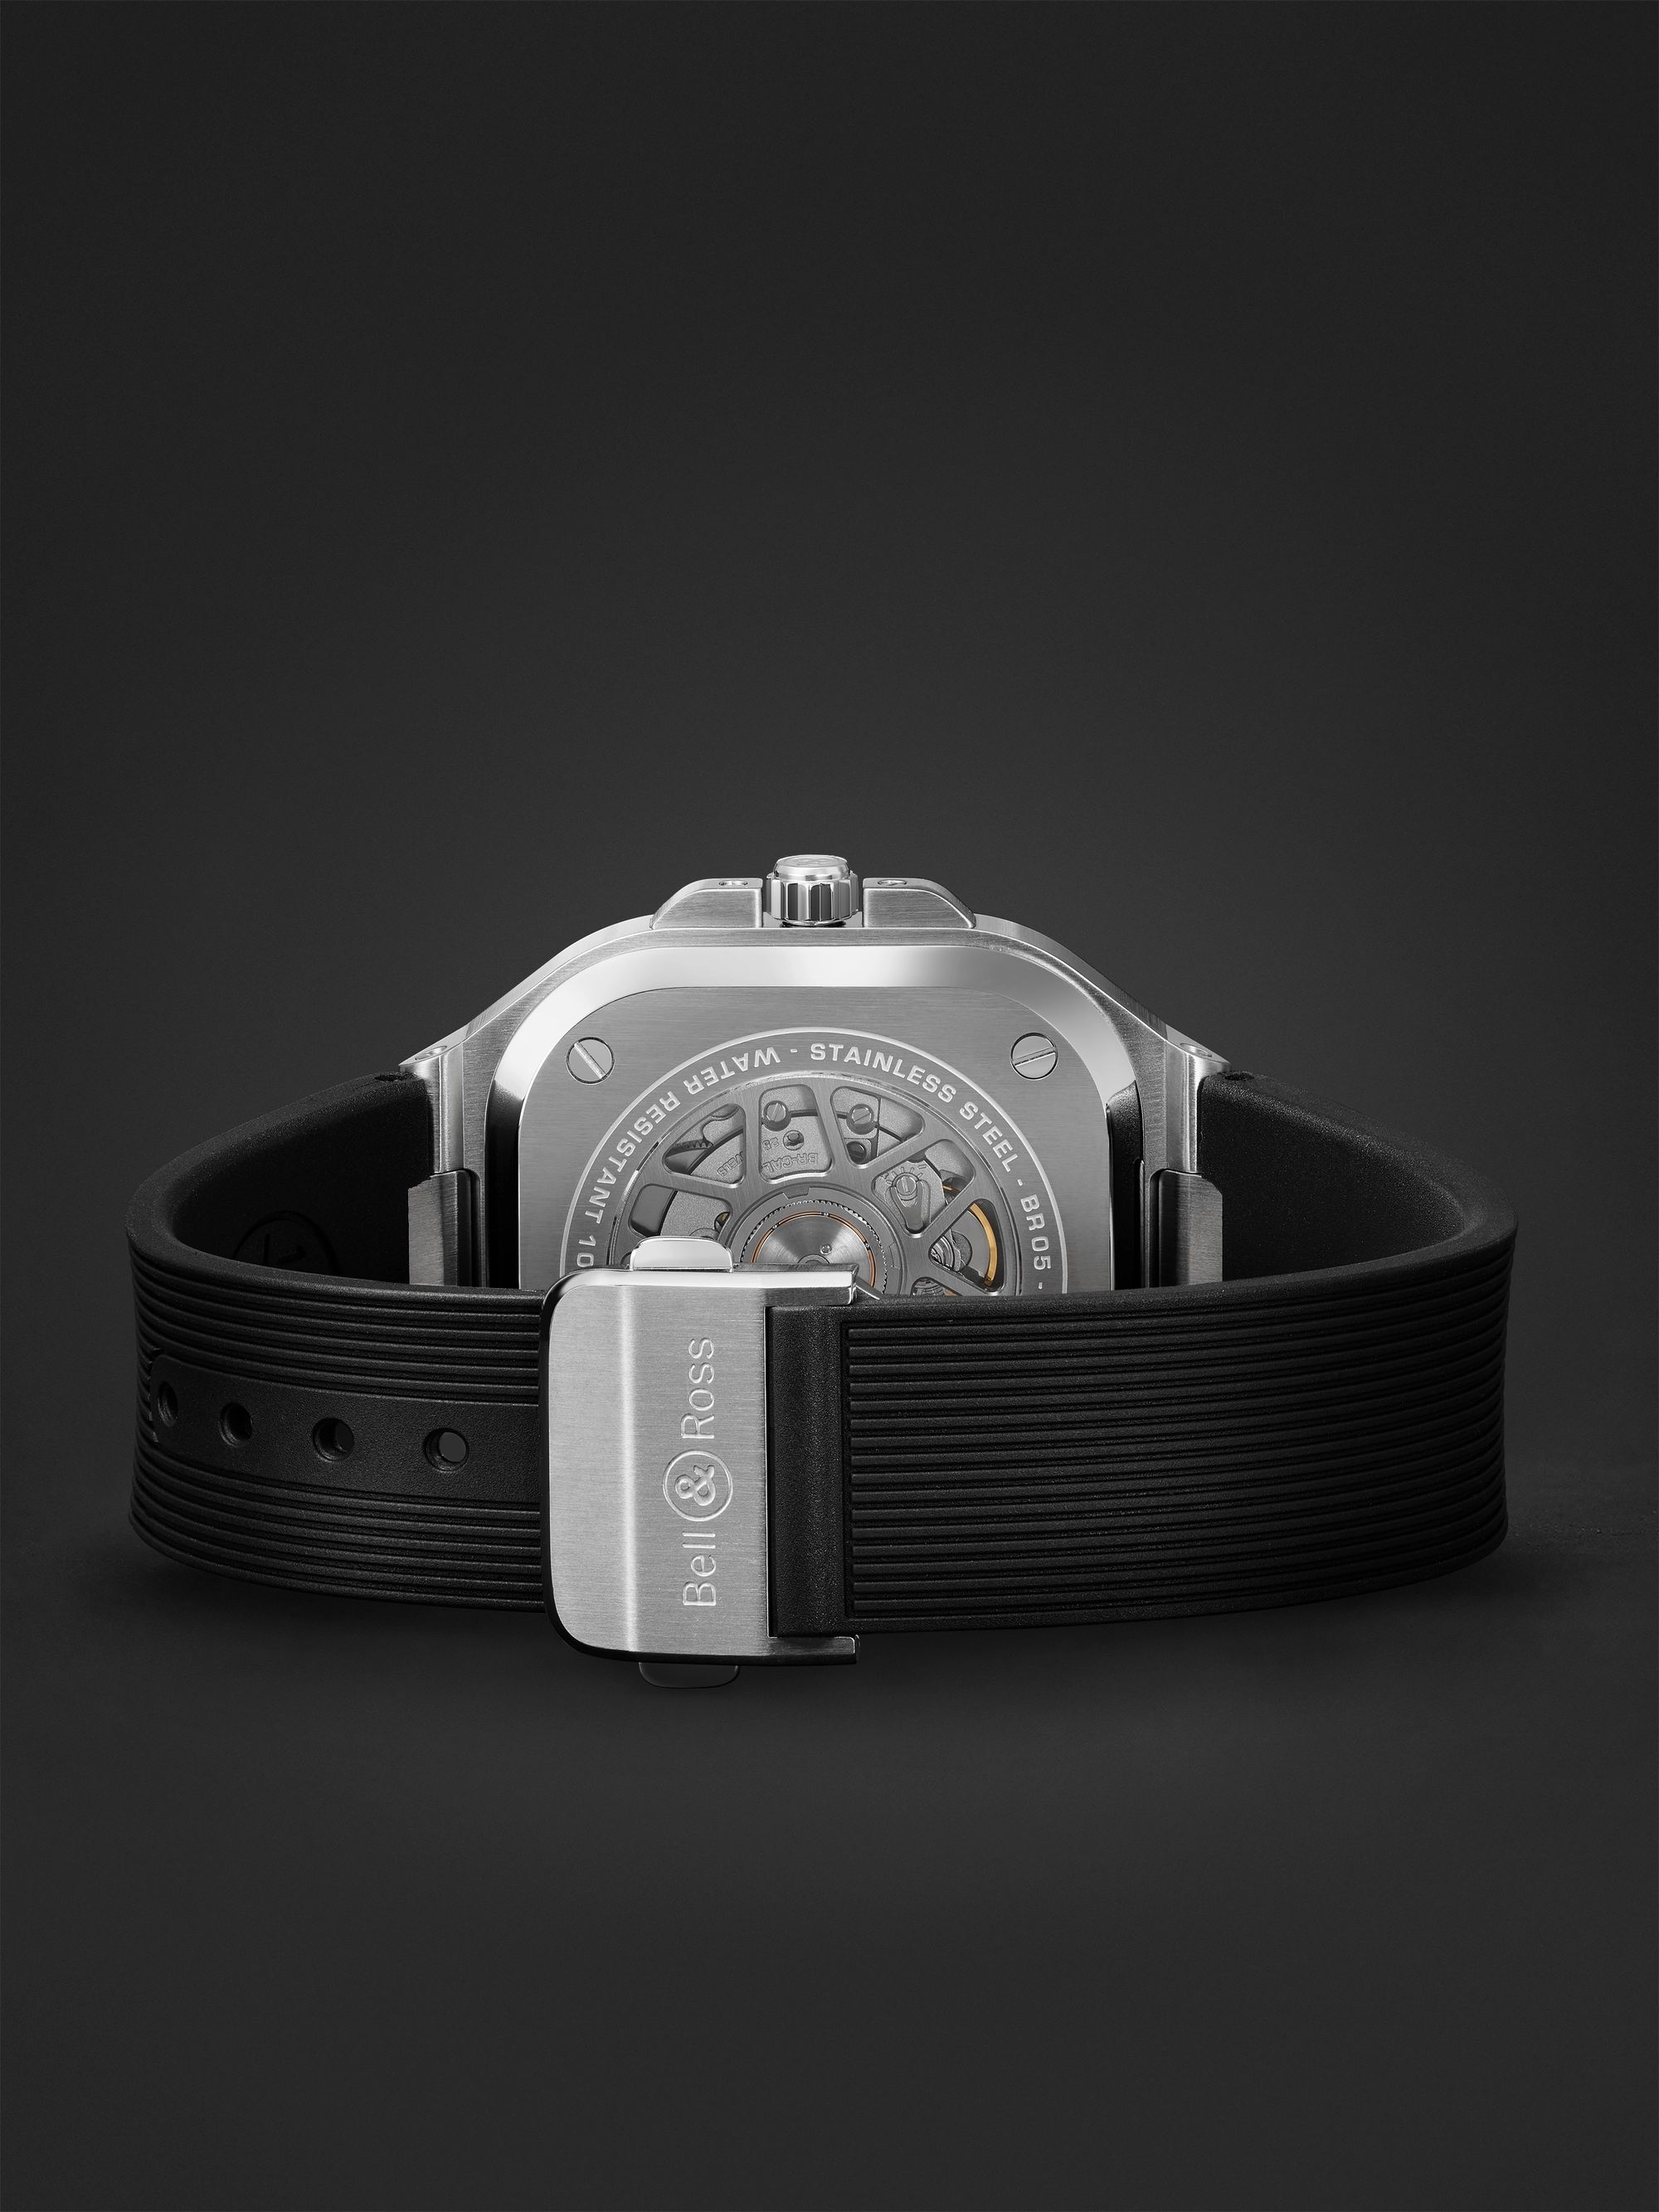 BELL & ROSS GMT Automatic 41mm Stainless Steel and Rubber Watch, Ref. No. BR05G-BL-ST/SRB